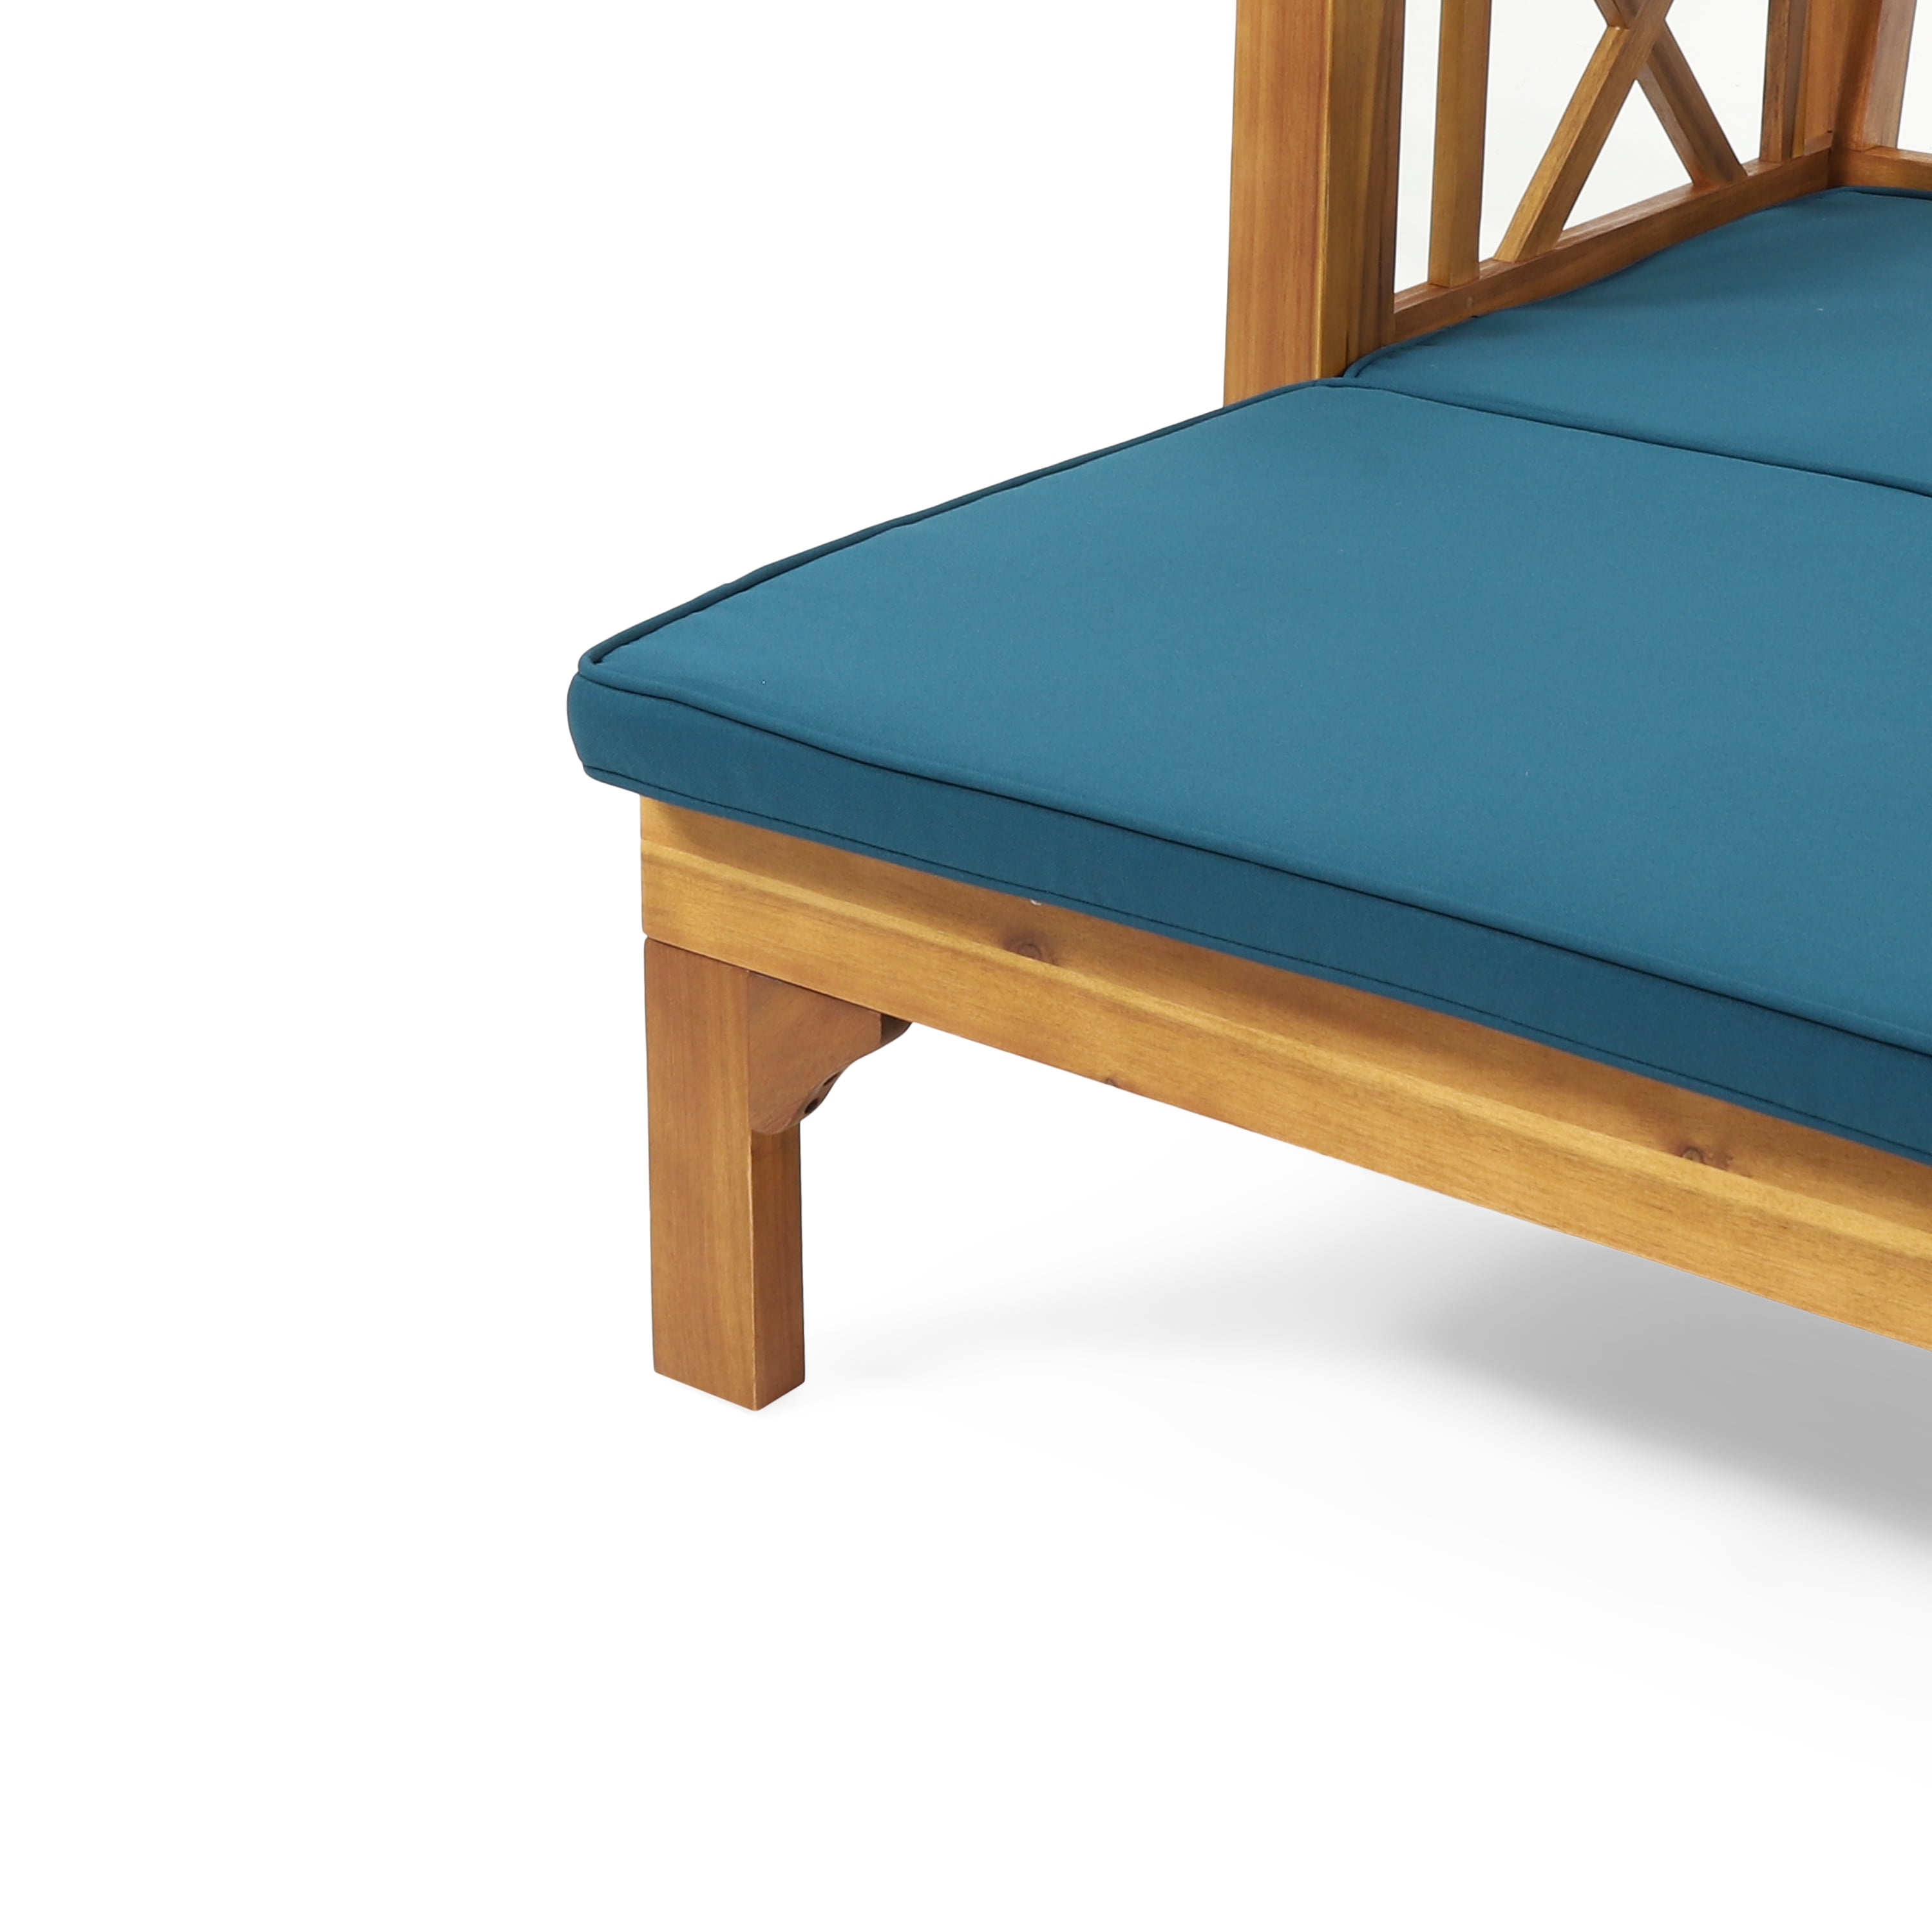 Sofa, Teak Wood Acacia Outdoor Studio Camille Dark GDF and Teal Extendable Daybed